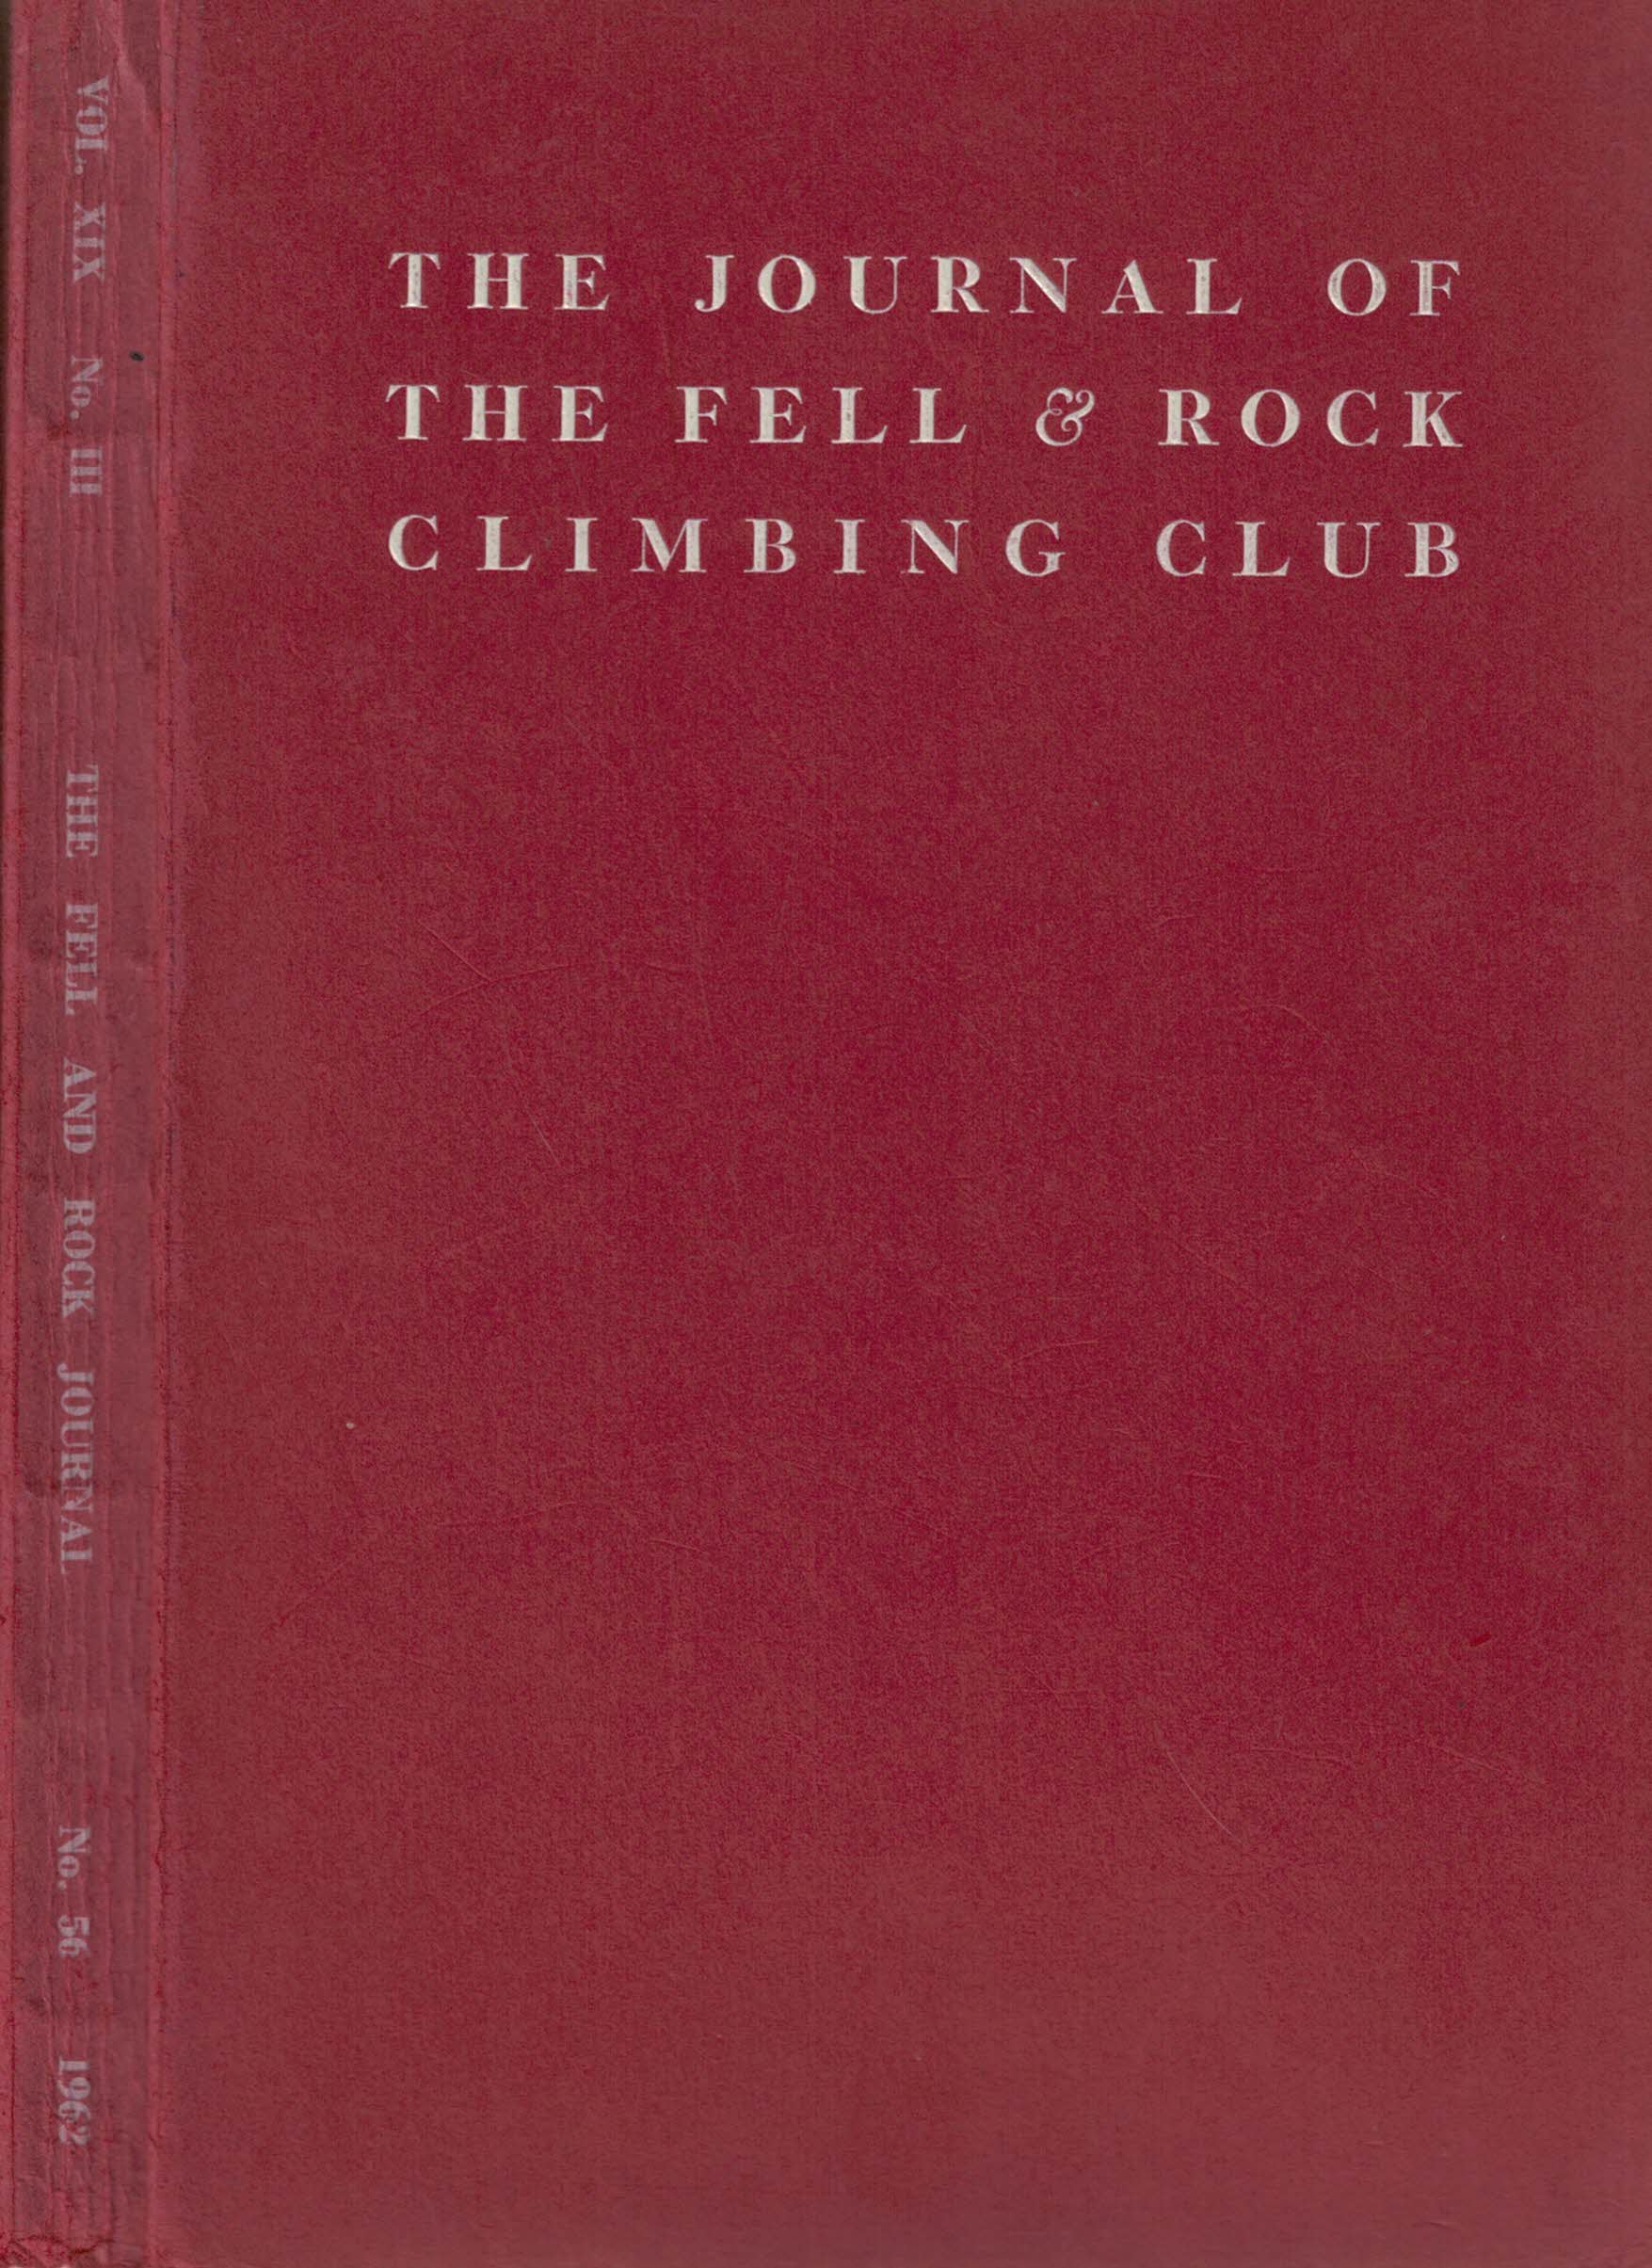 The Journal of the Fell & Rock Climbing Club of the English Lake District. No 56. (Volume 19 No 3) 1962.